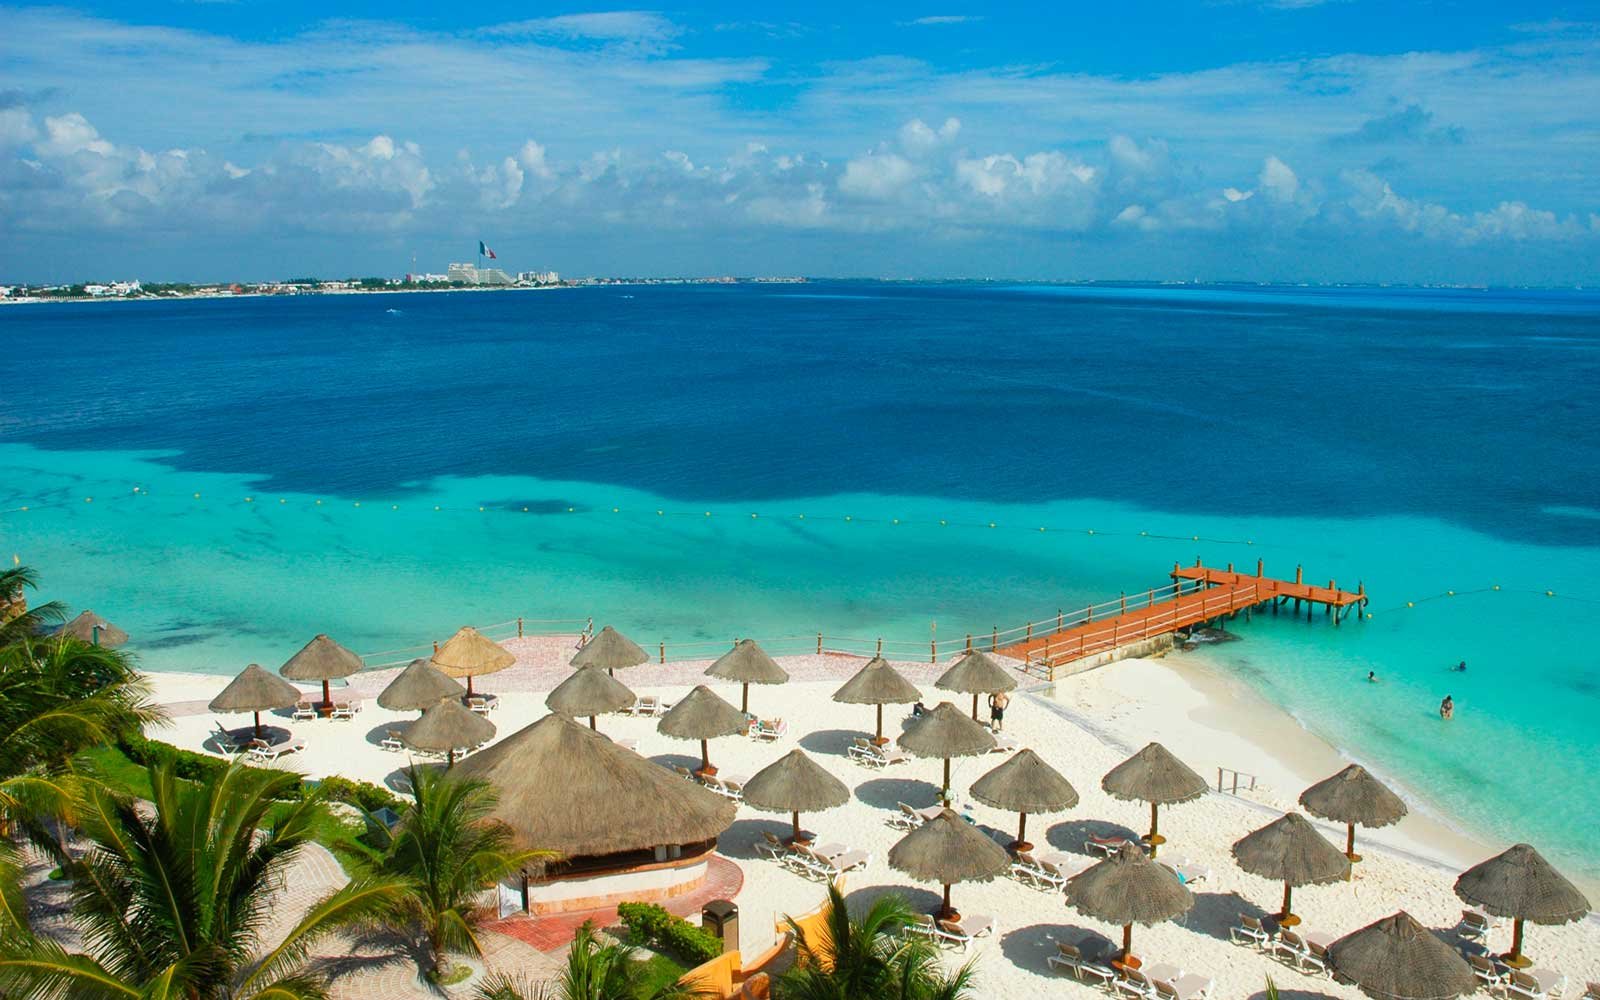 Houston to Cancun Mexico $185 RT Nonstop Airfares on United Airlines BE (Travel January - May 2022)